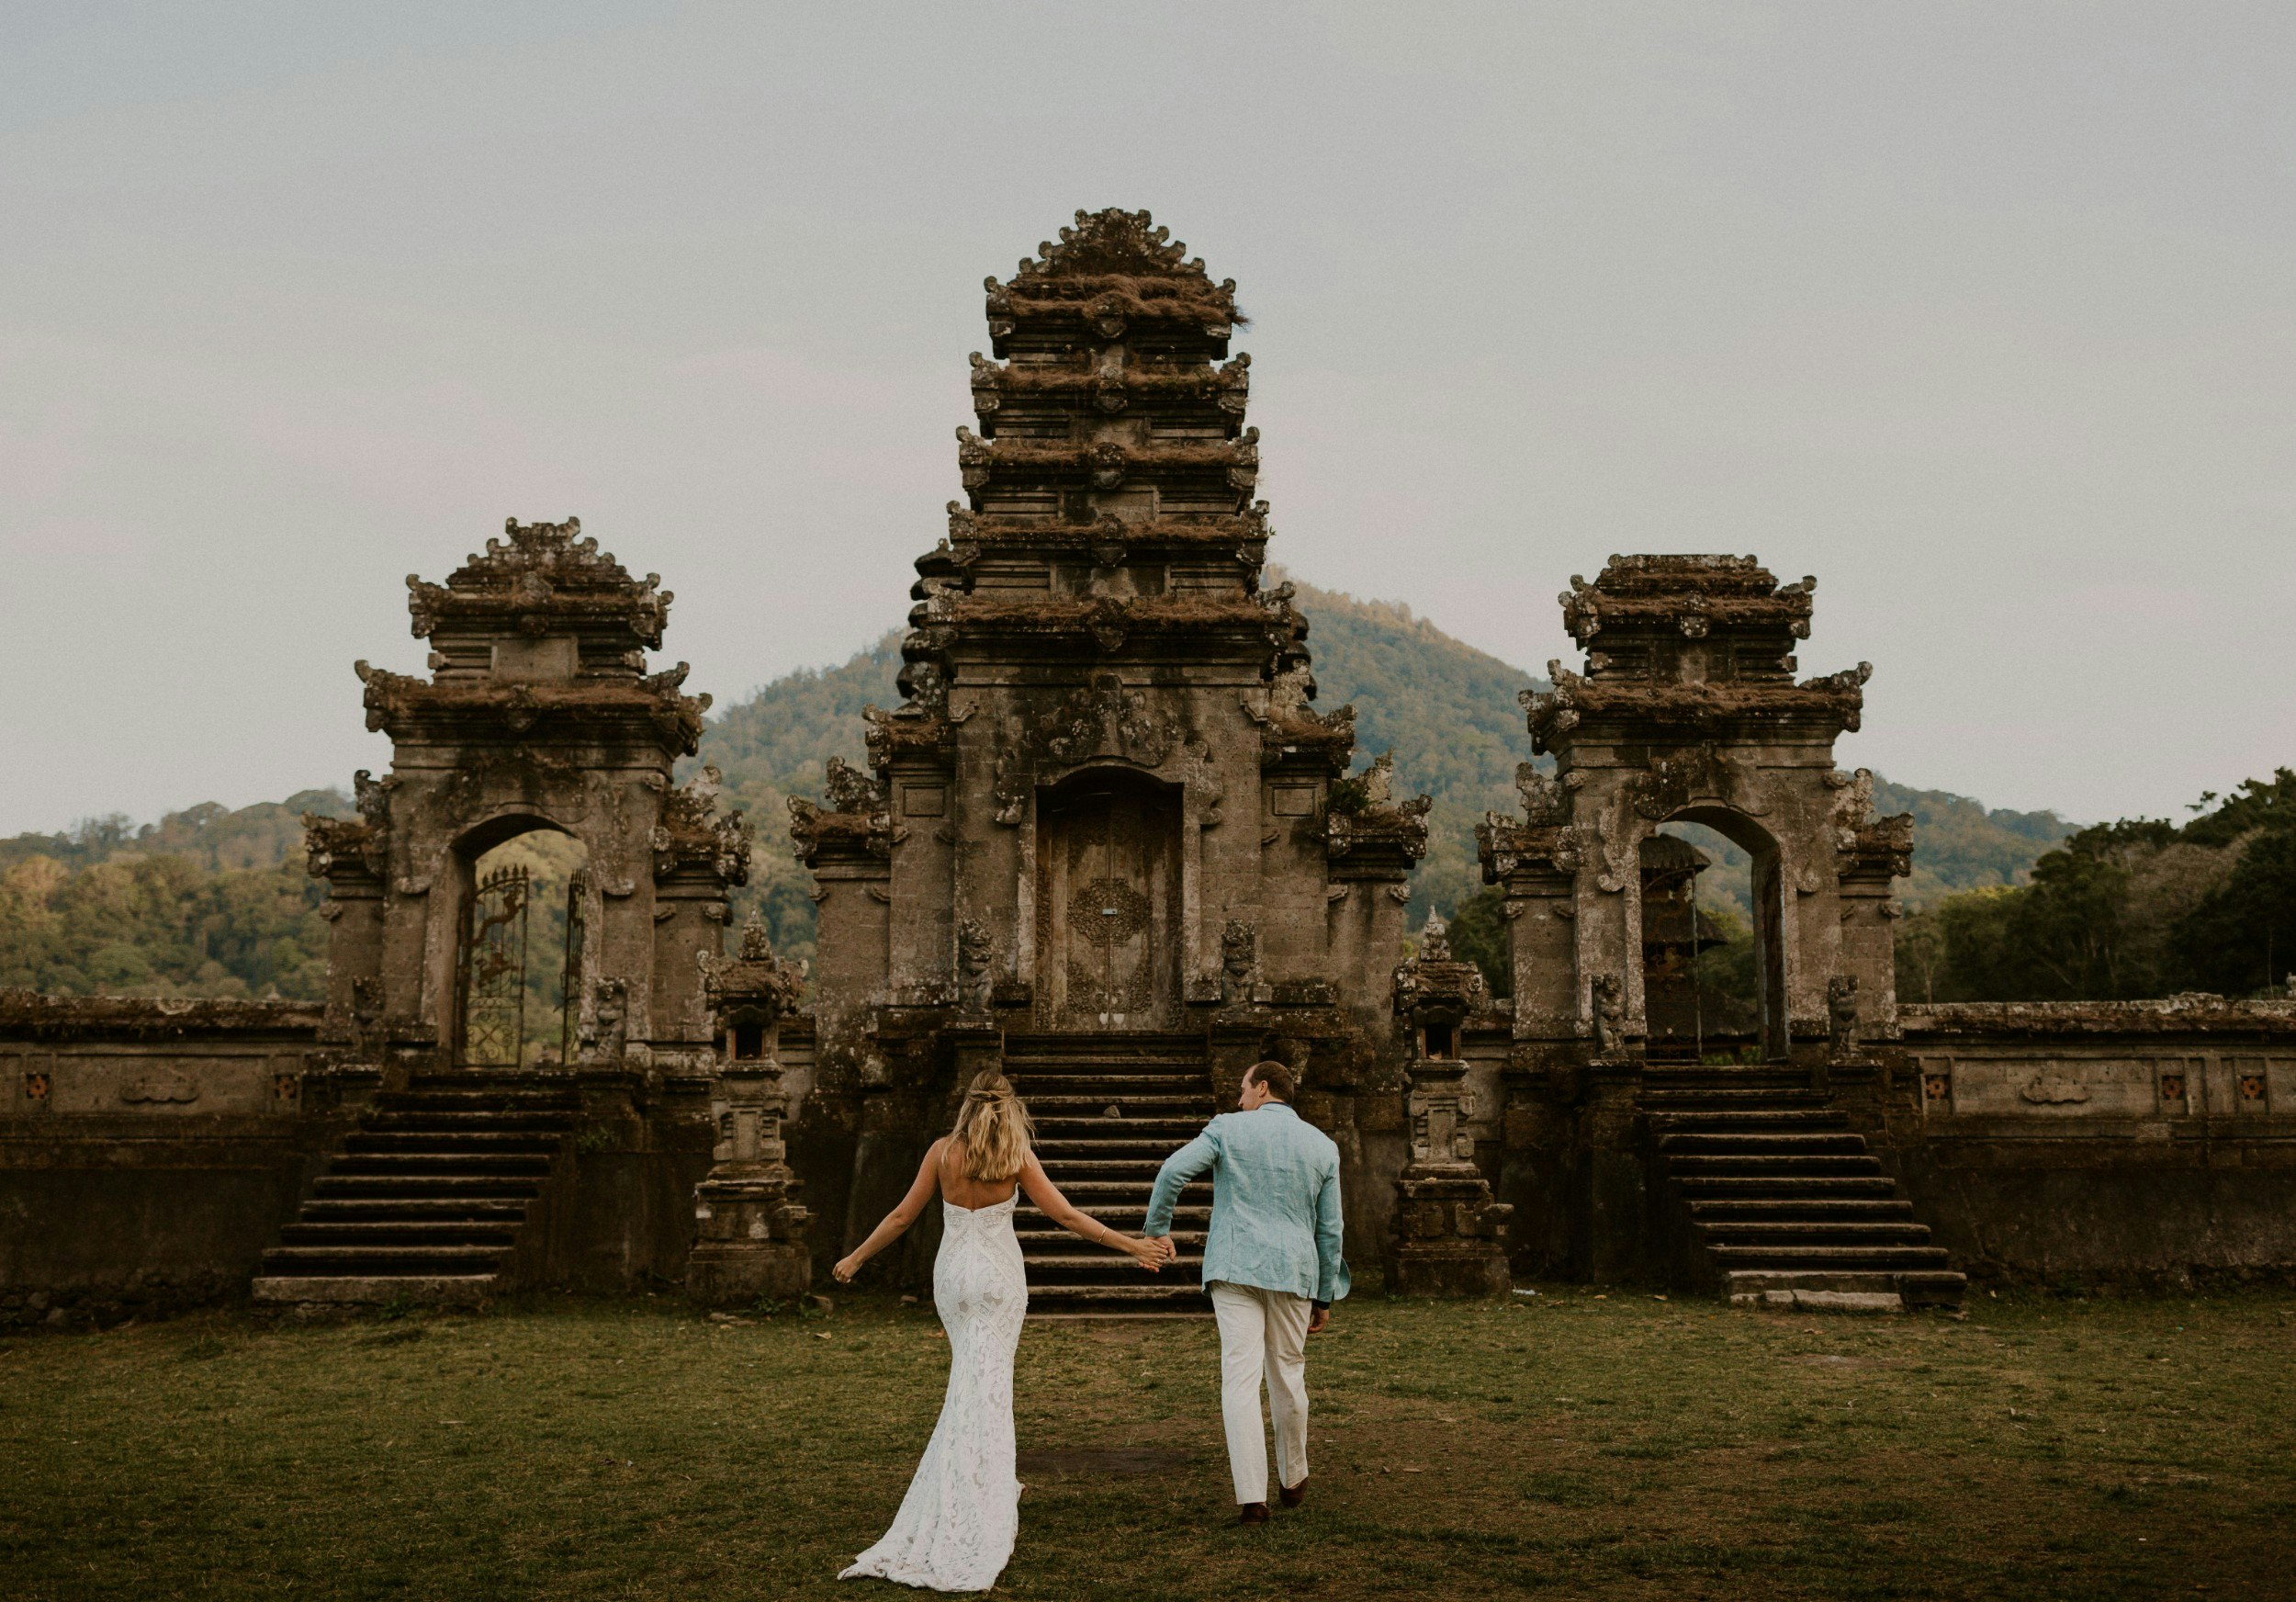 A bride and groom in front of a temple in Bali.